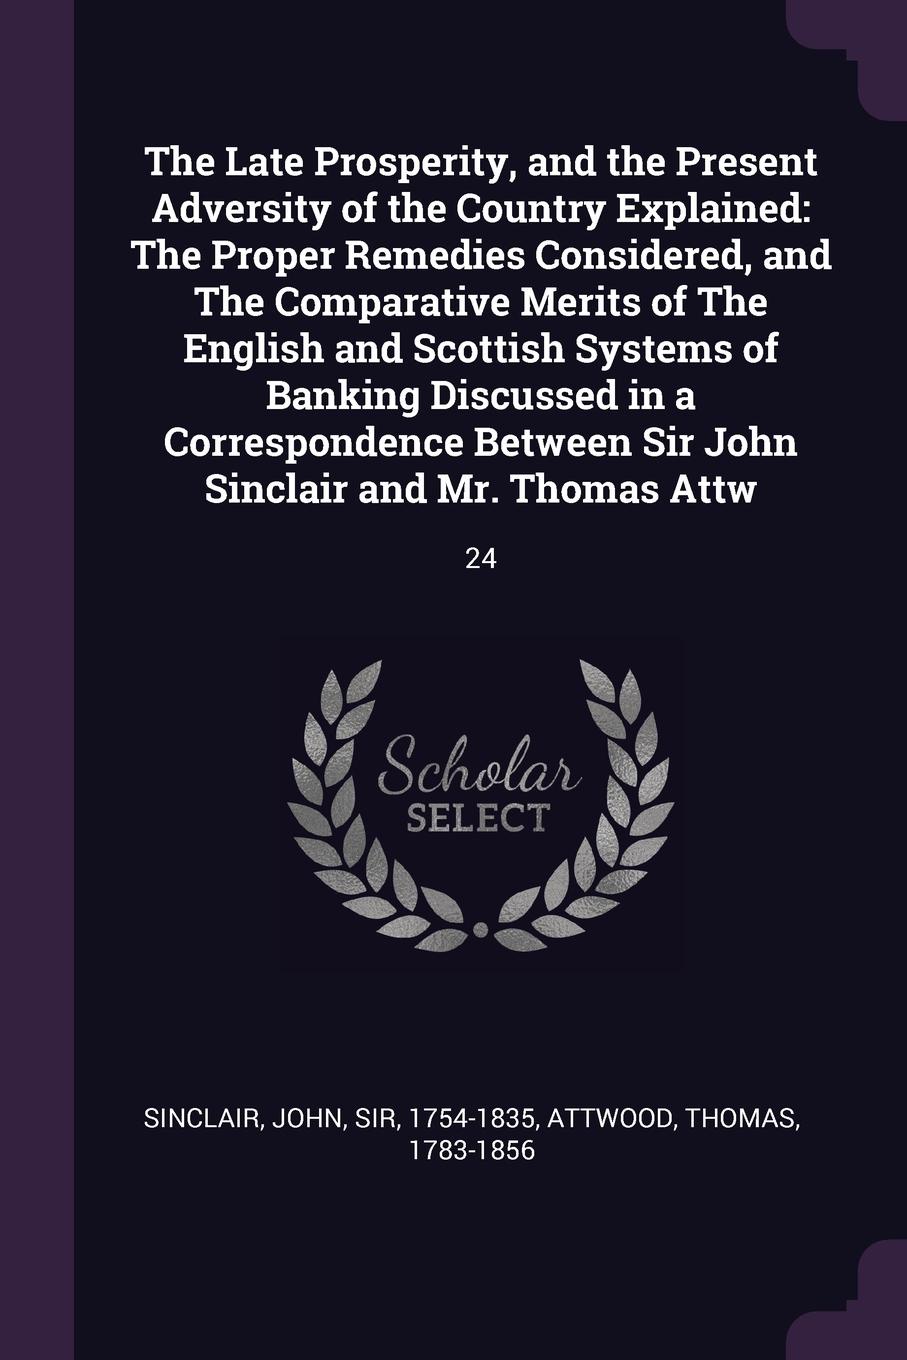 The Late Prosperity, and the Present Adversity of the Country Explained. The Proper Remedies Considered, and The Comparative Merits of The English and Scottish Systems of Banking Discussed in a Correspondence Between Sir John Sinclair and Mr. Thom...